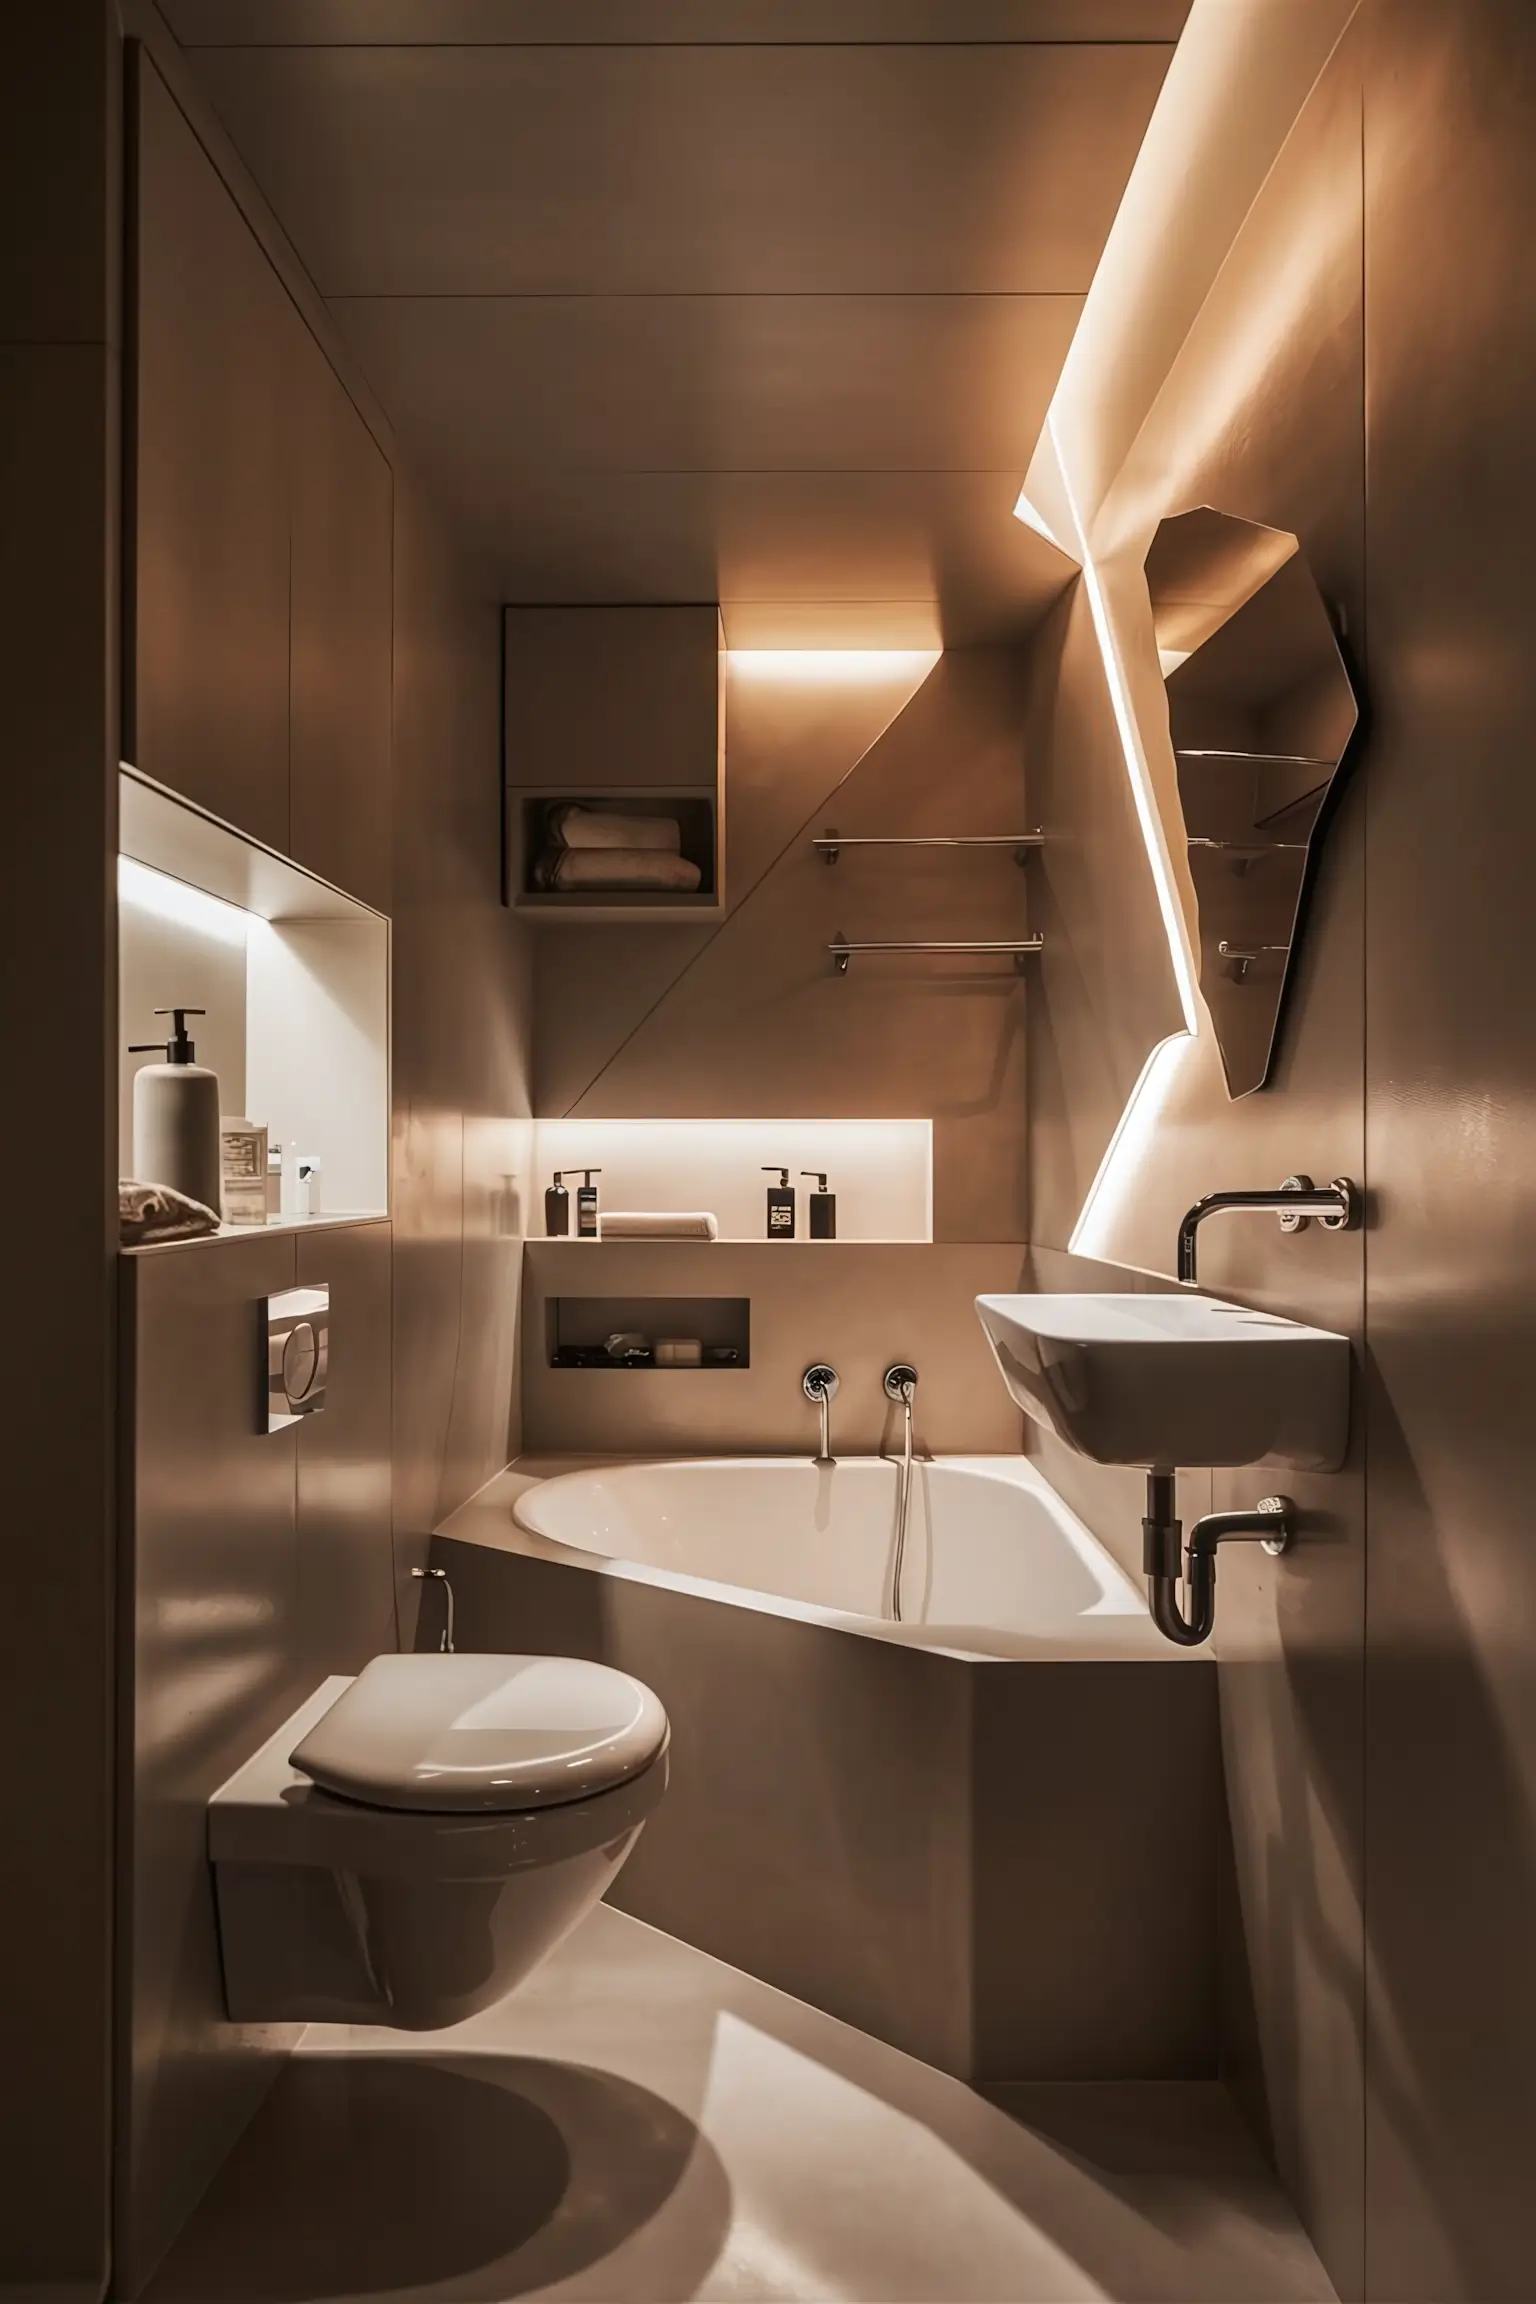 Modern small bathroom with space-saving fixtures and creative storage solutions.